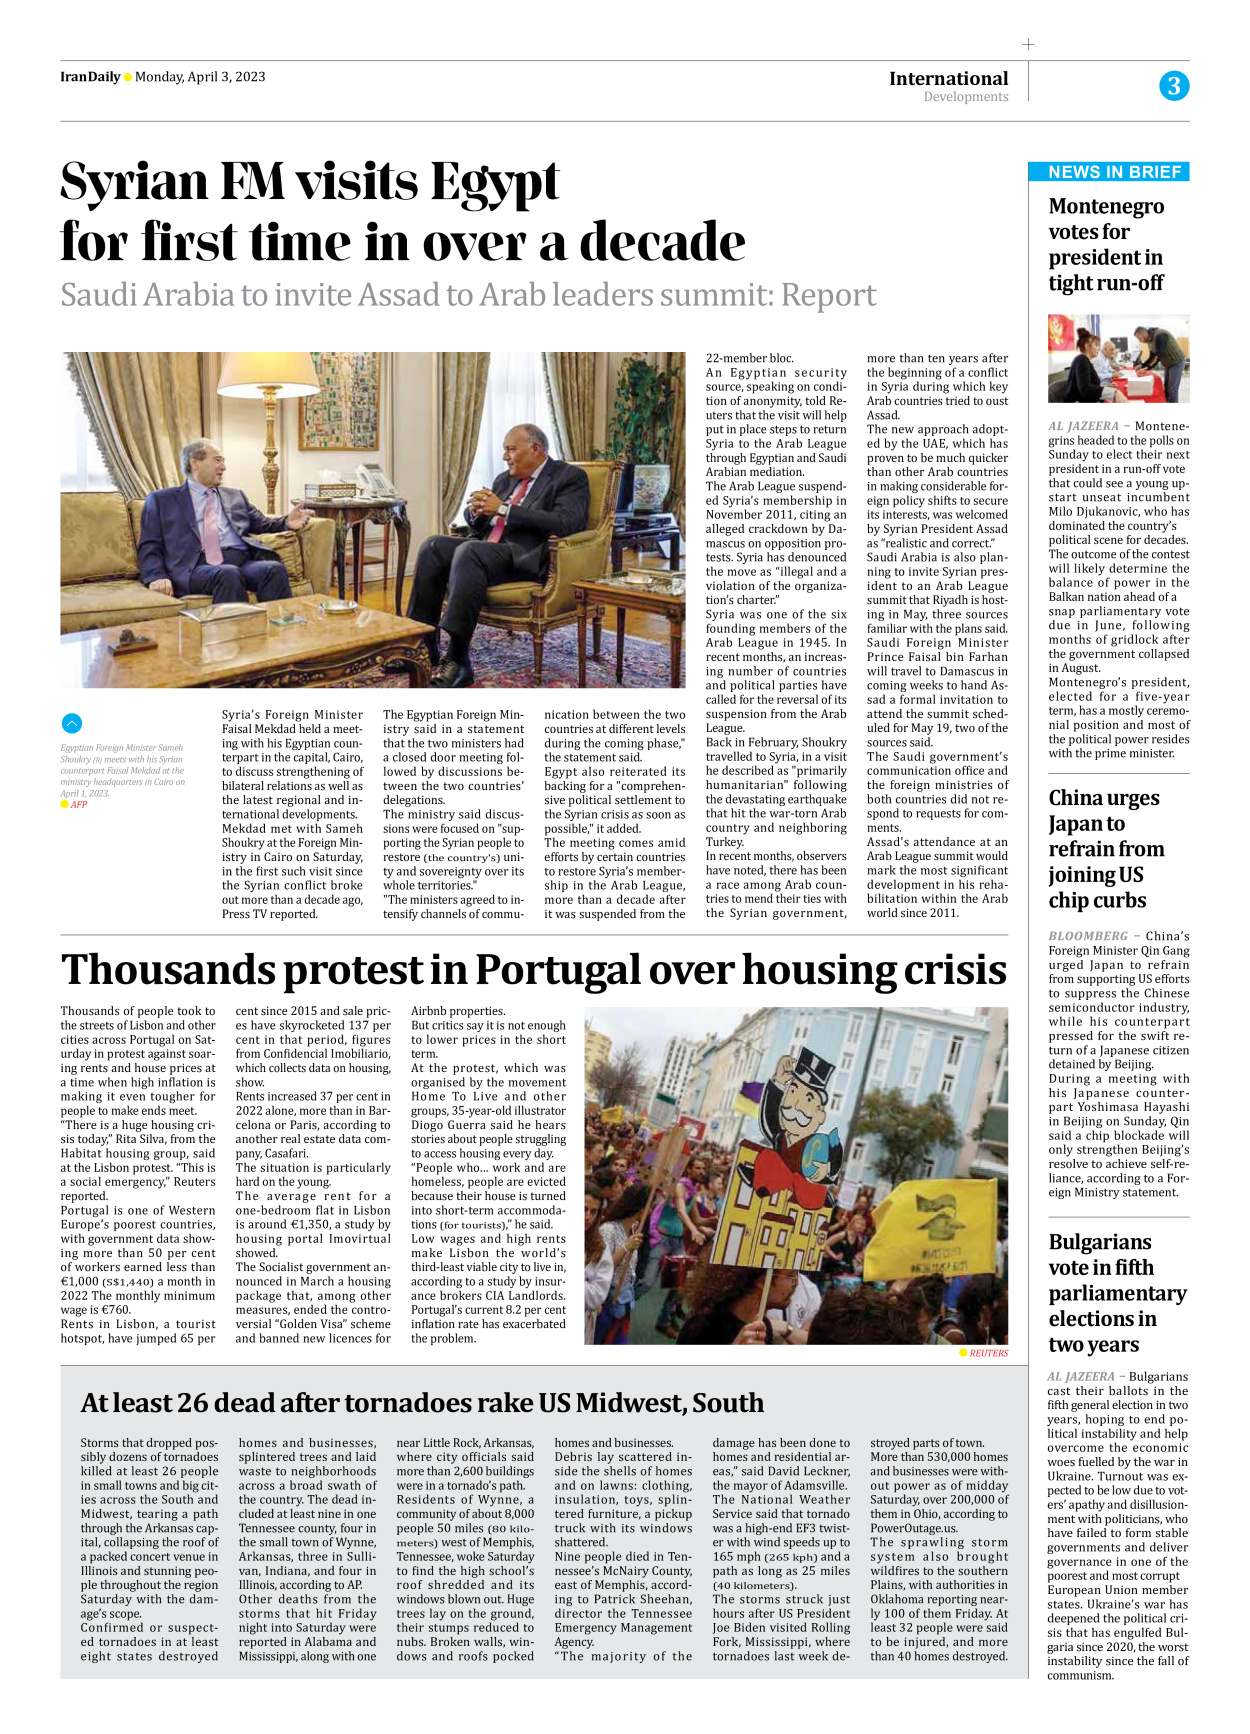 Iran Daily - Number Seven Thousand Two Hundred and Sixty - 03 April 2023 - Page 3